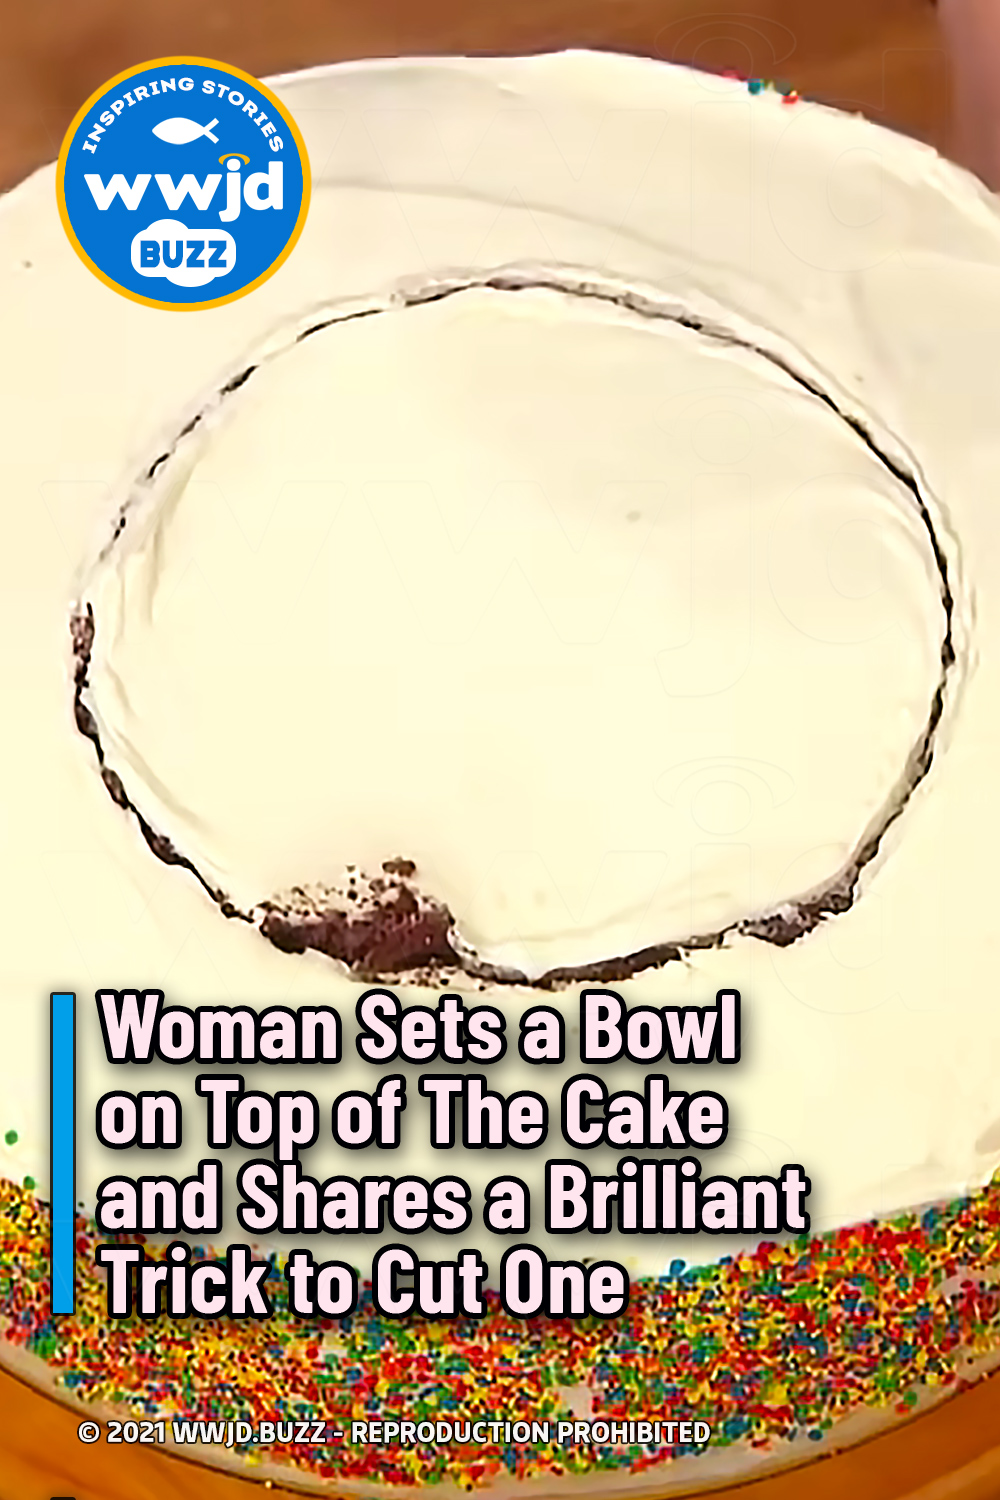 Woman Sets a Bowl on Top of The Cake and Shares a Brilliant Trick to Cut One